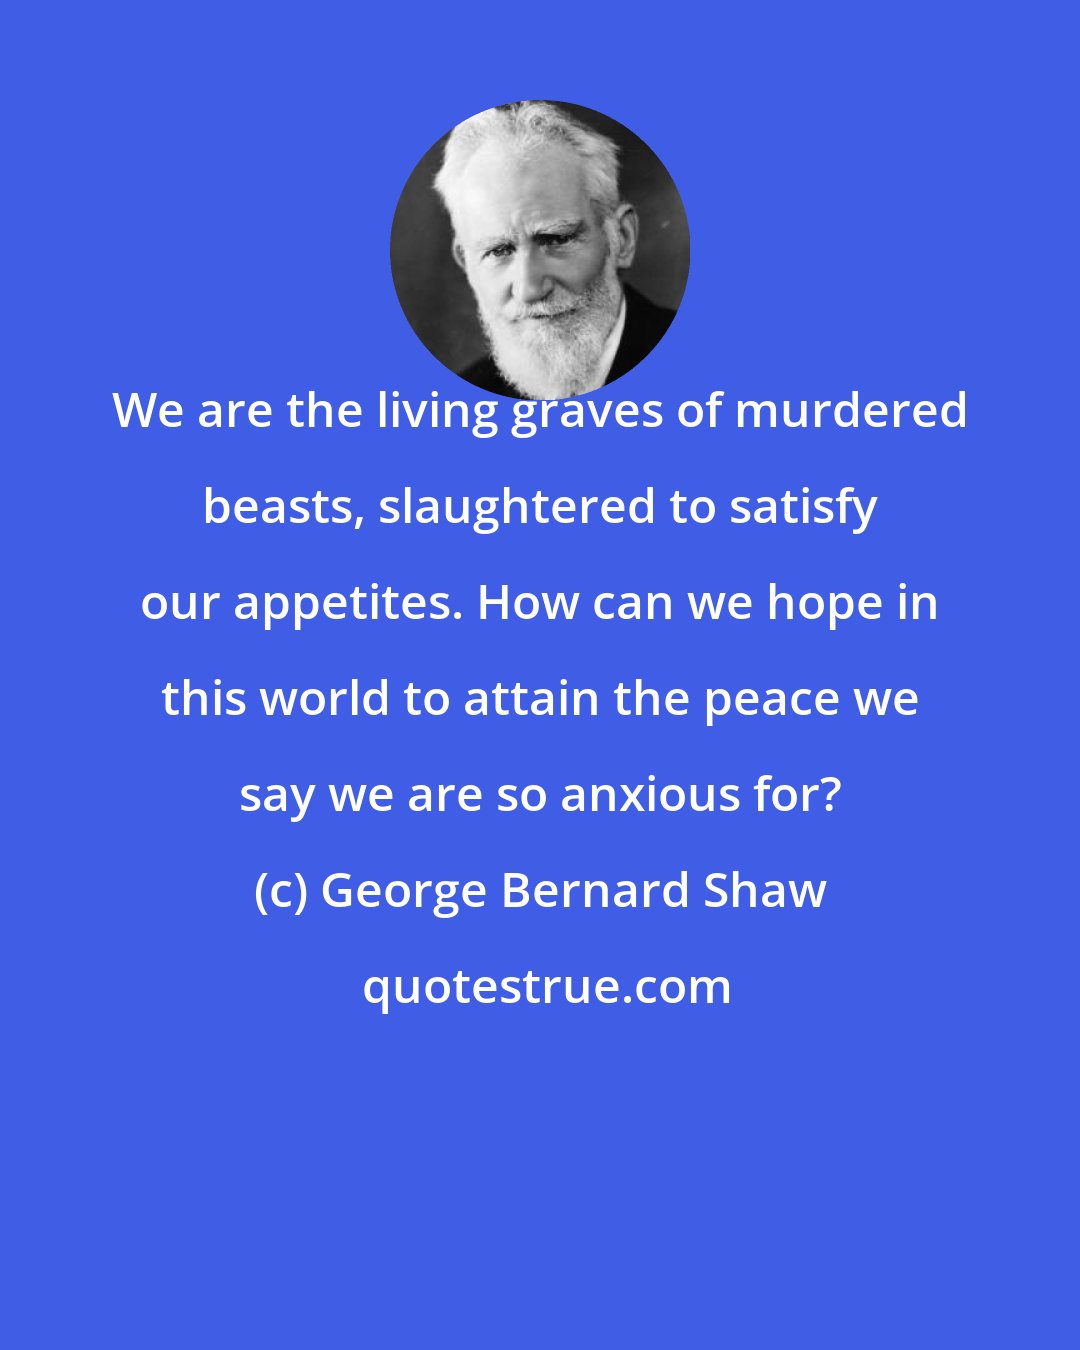 George Bernard Shaw: We are the living graves of murdered beasts, slaughtered to satisfy our appetites. How can we hope in this world to attain the peace we say we are so anxious for?